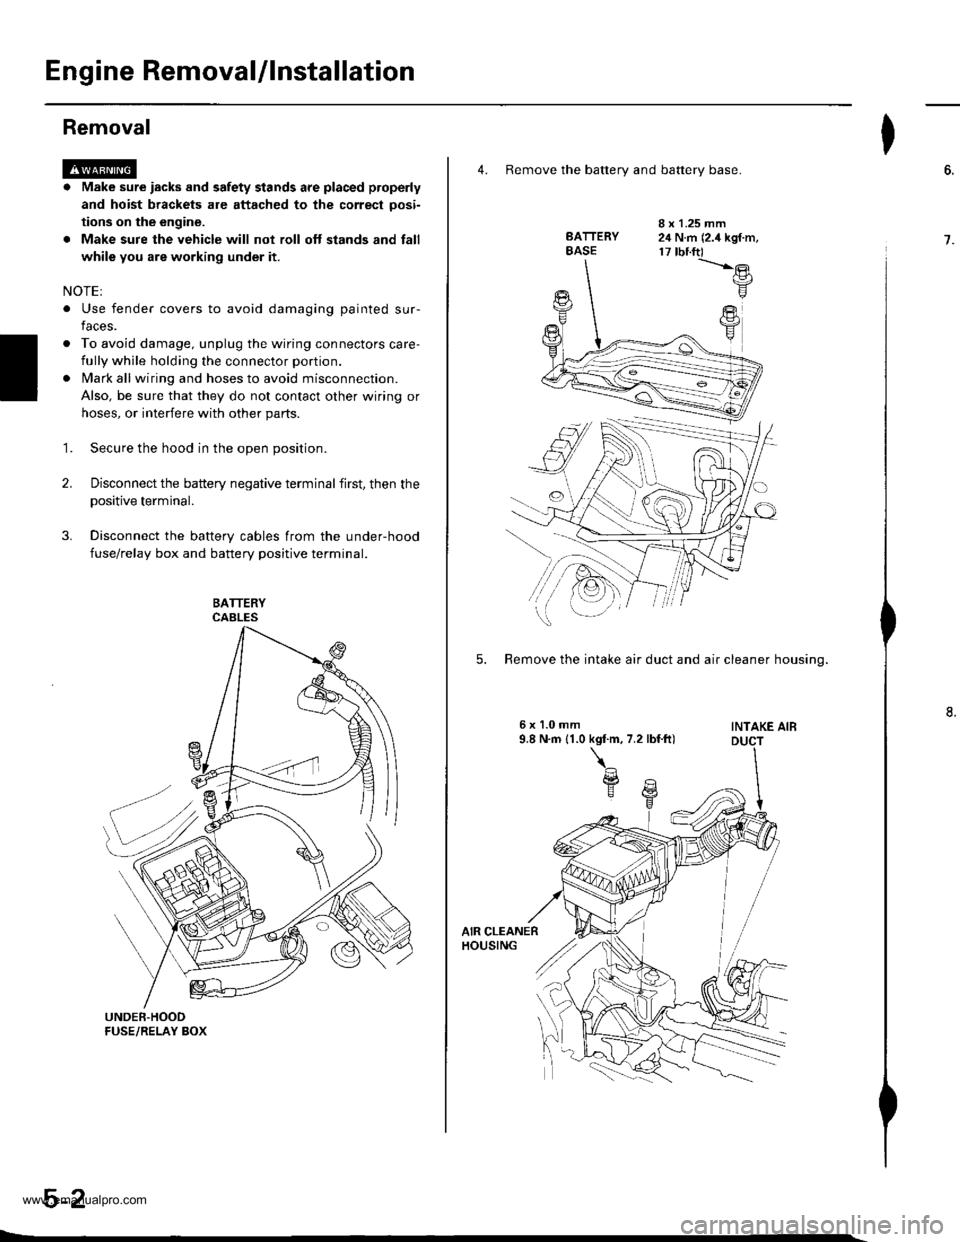 HONDA CR-V 1999 RD1-RD3 / 1.G Workshop Manual 
Engine RemovaUlnstallation
Removal
@a Make sure iacks and safety stands are placed properly
and hoist brackets are attached to the correct oosi-
tions on the engine.
. Make sure the vehicle will not 